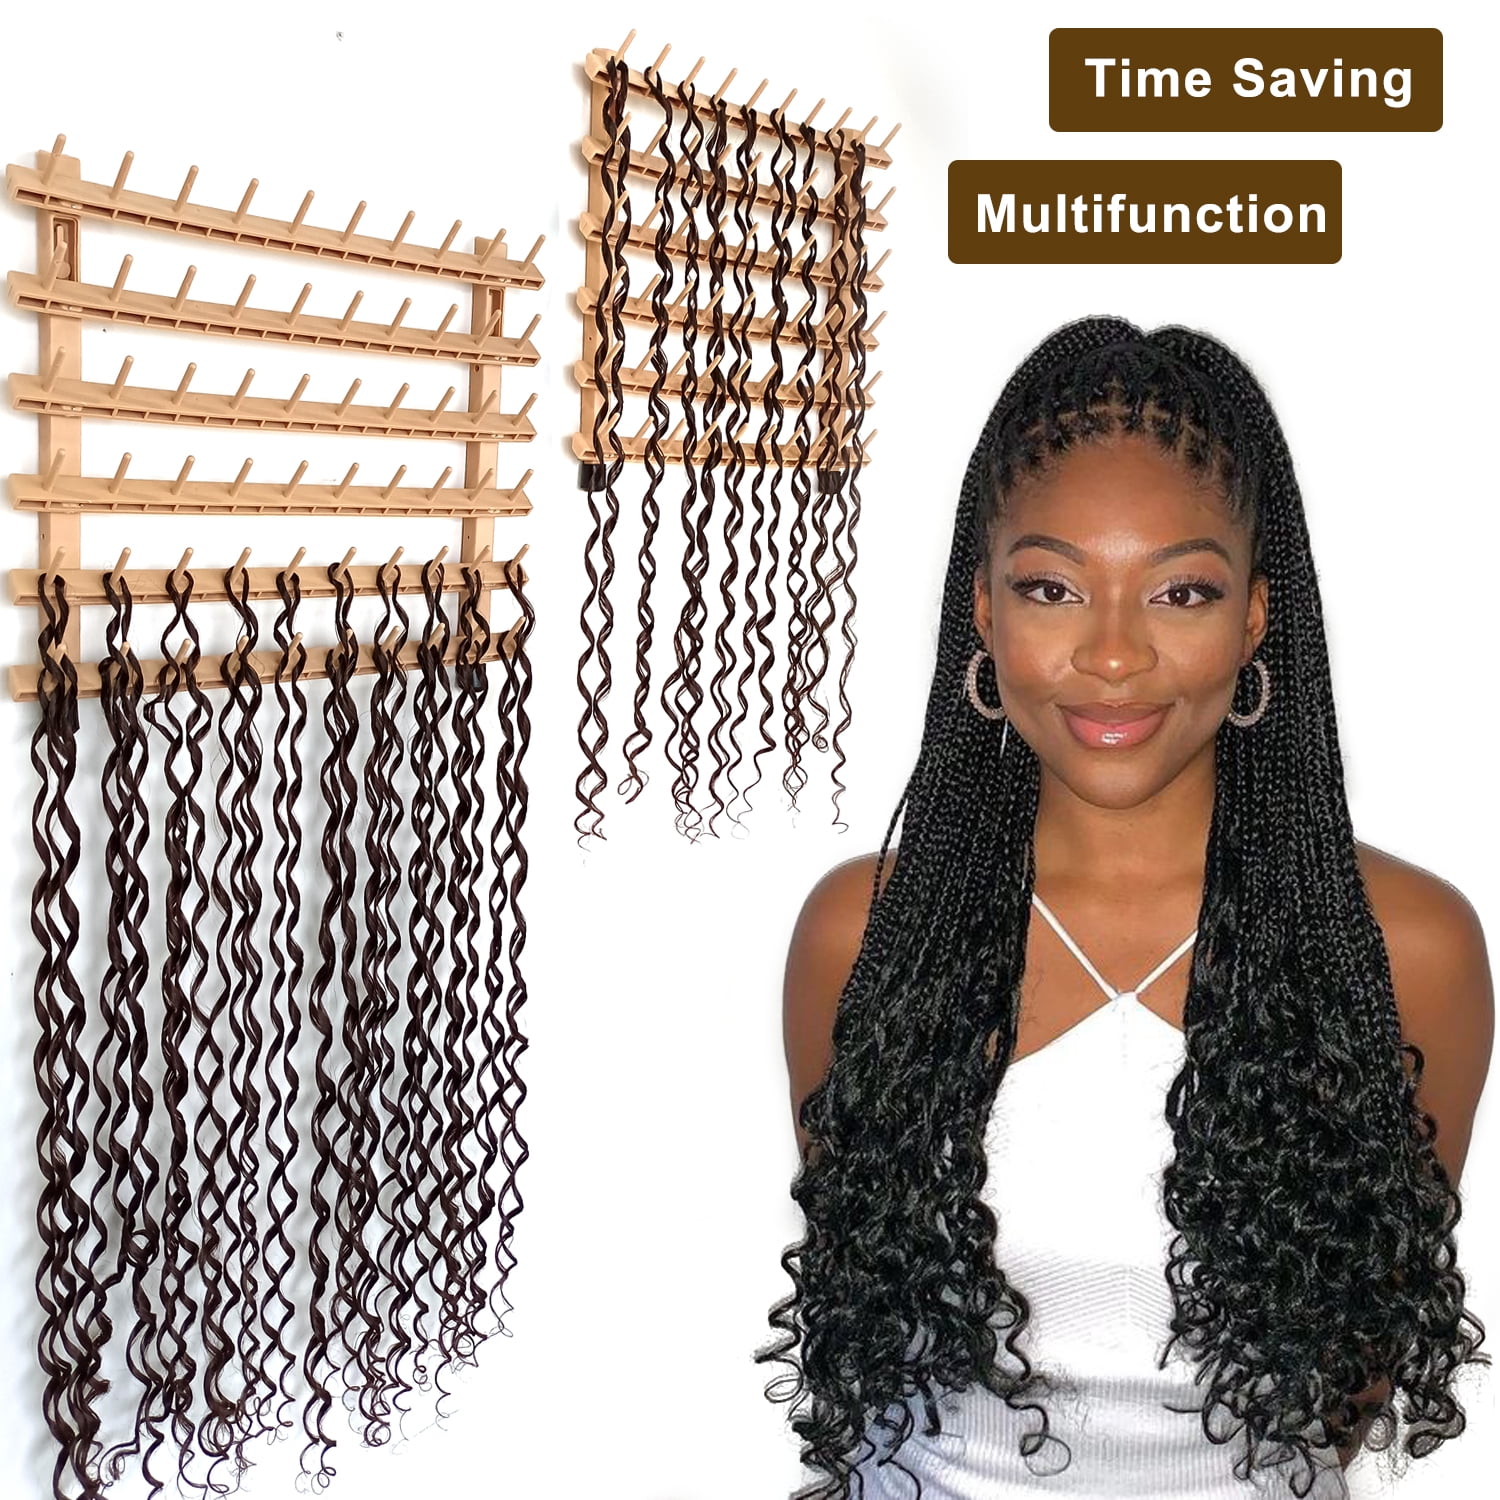 How to prep your braiding rack efficiently .. Braid time cut in 1